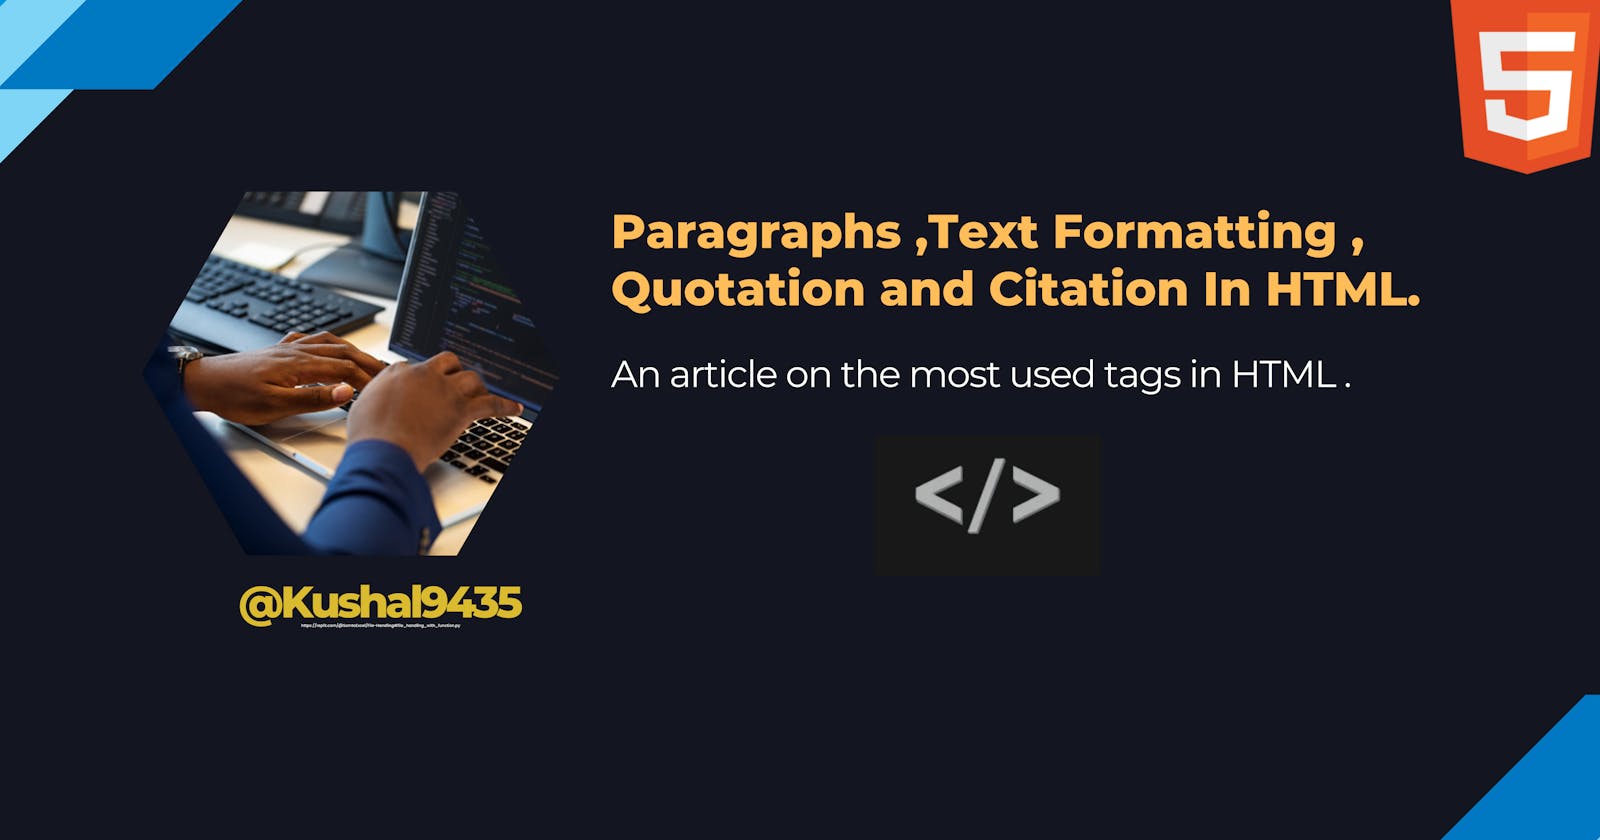 Tags in HTML (Paragraphs ,Text Formatting , Quotation and Citation In HTML)